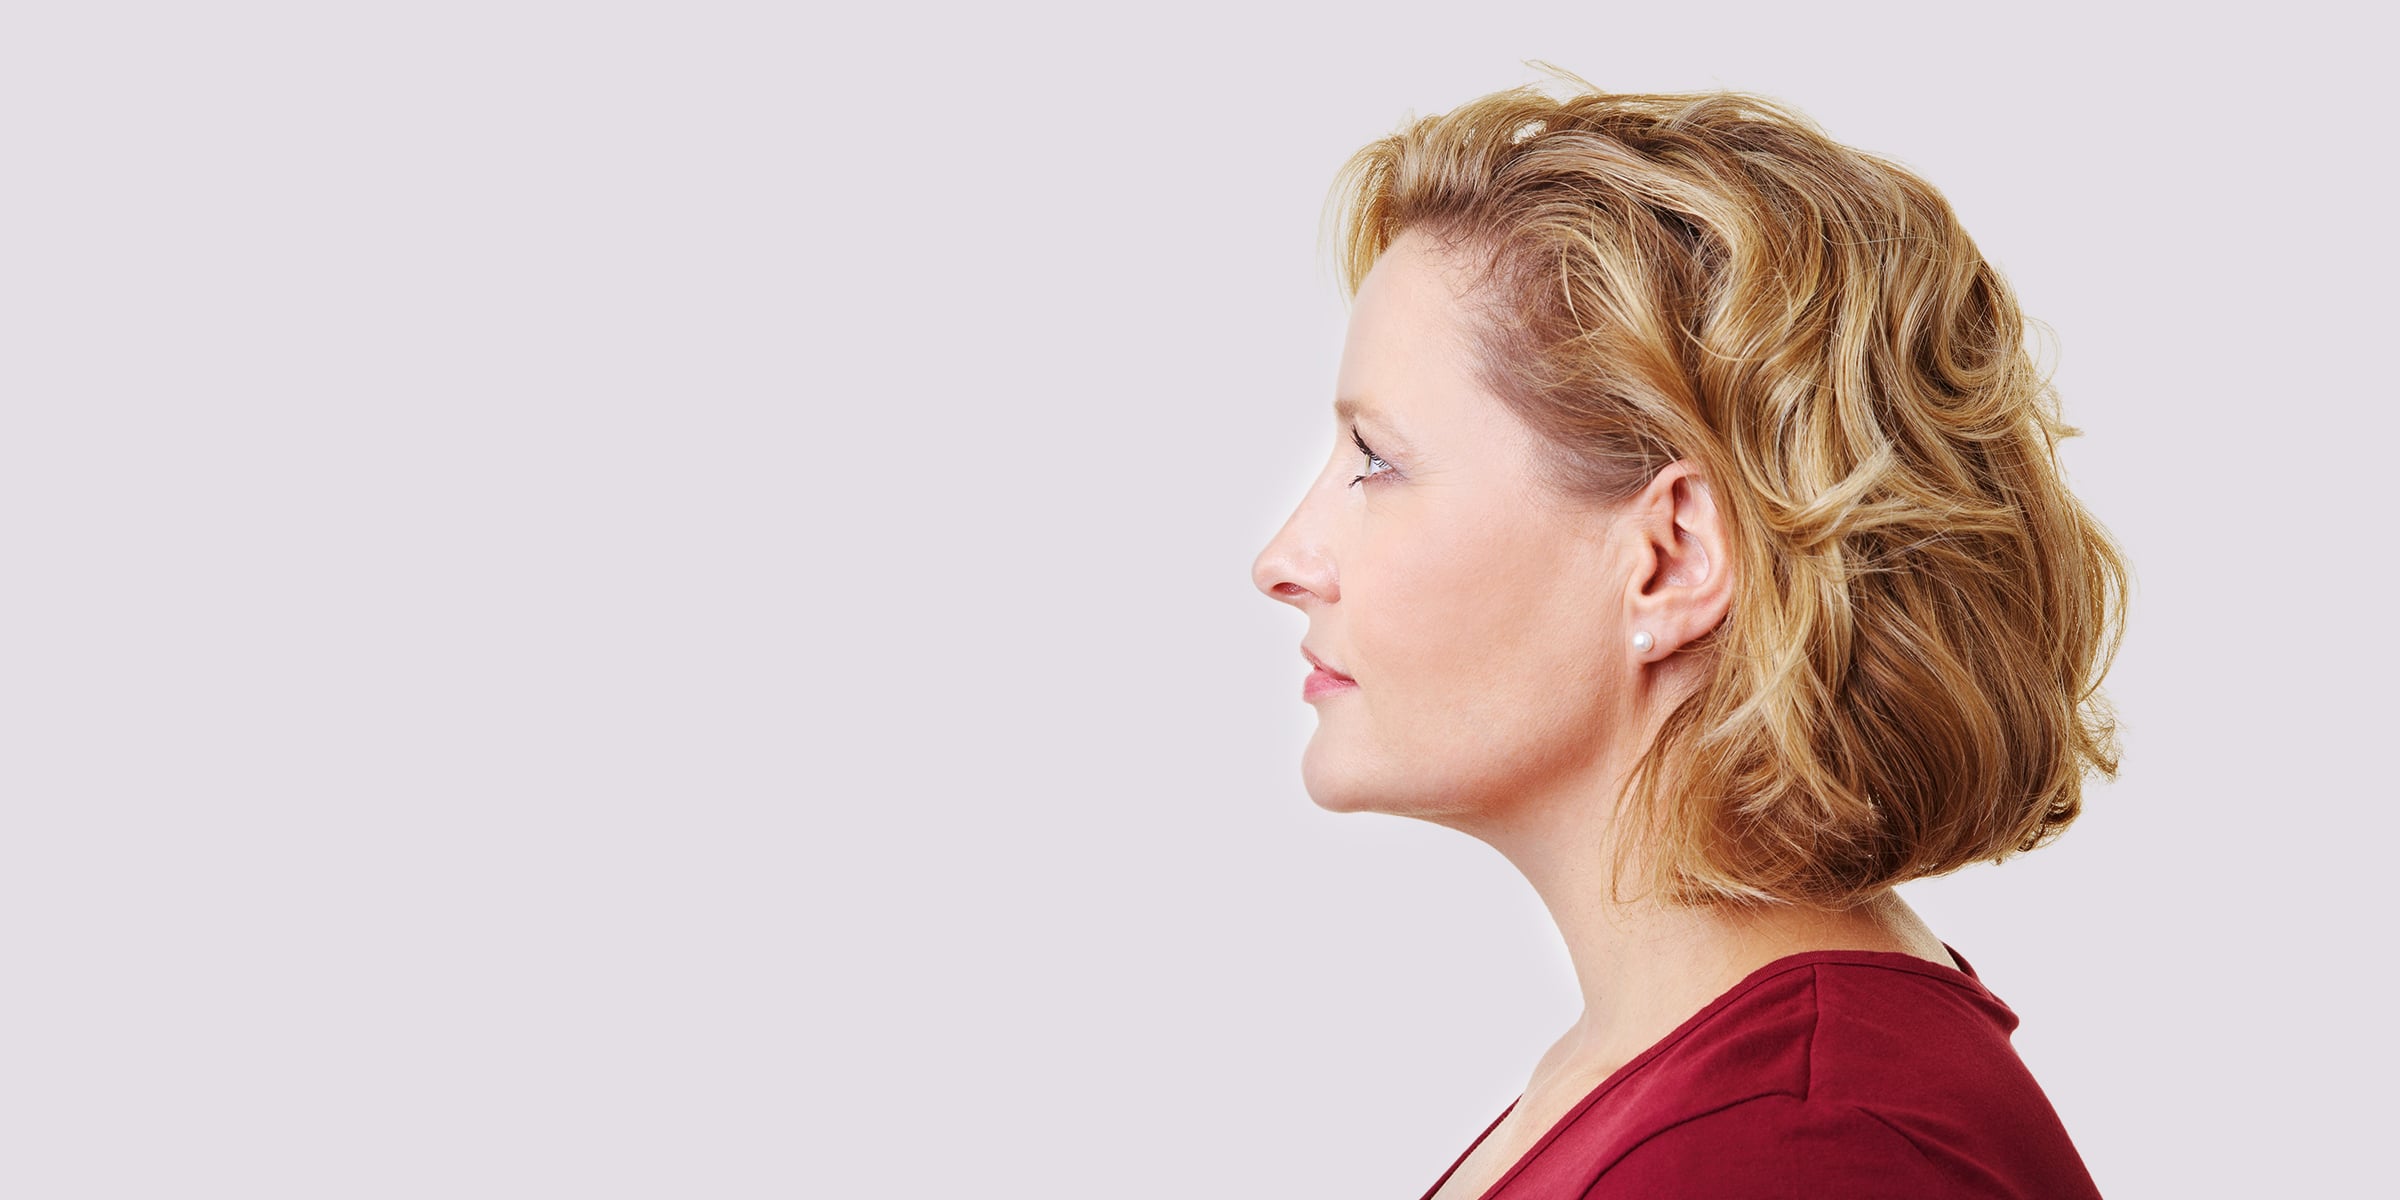 Profile of a blonde wavy-haired woman in a red shirt.